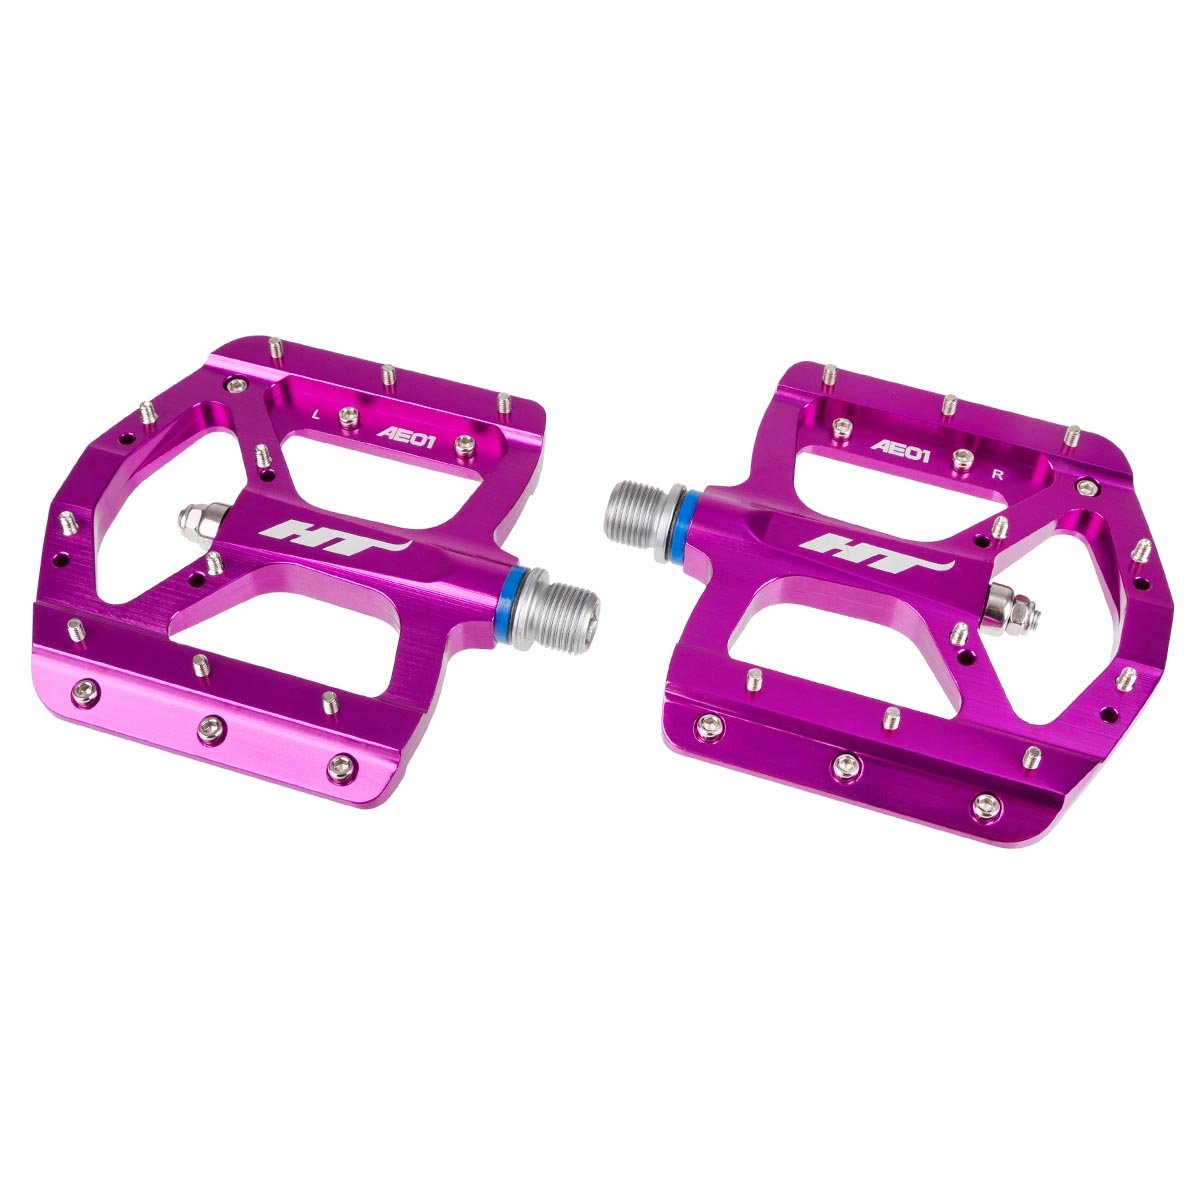 HT Components Pedals AE01 Purple